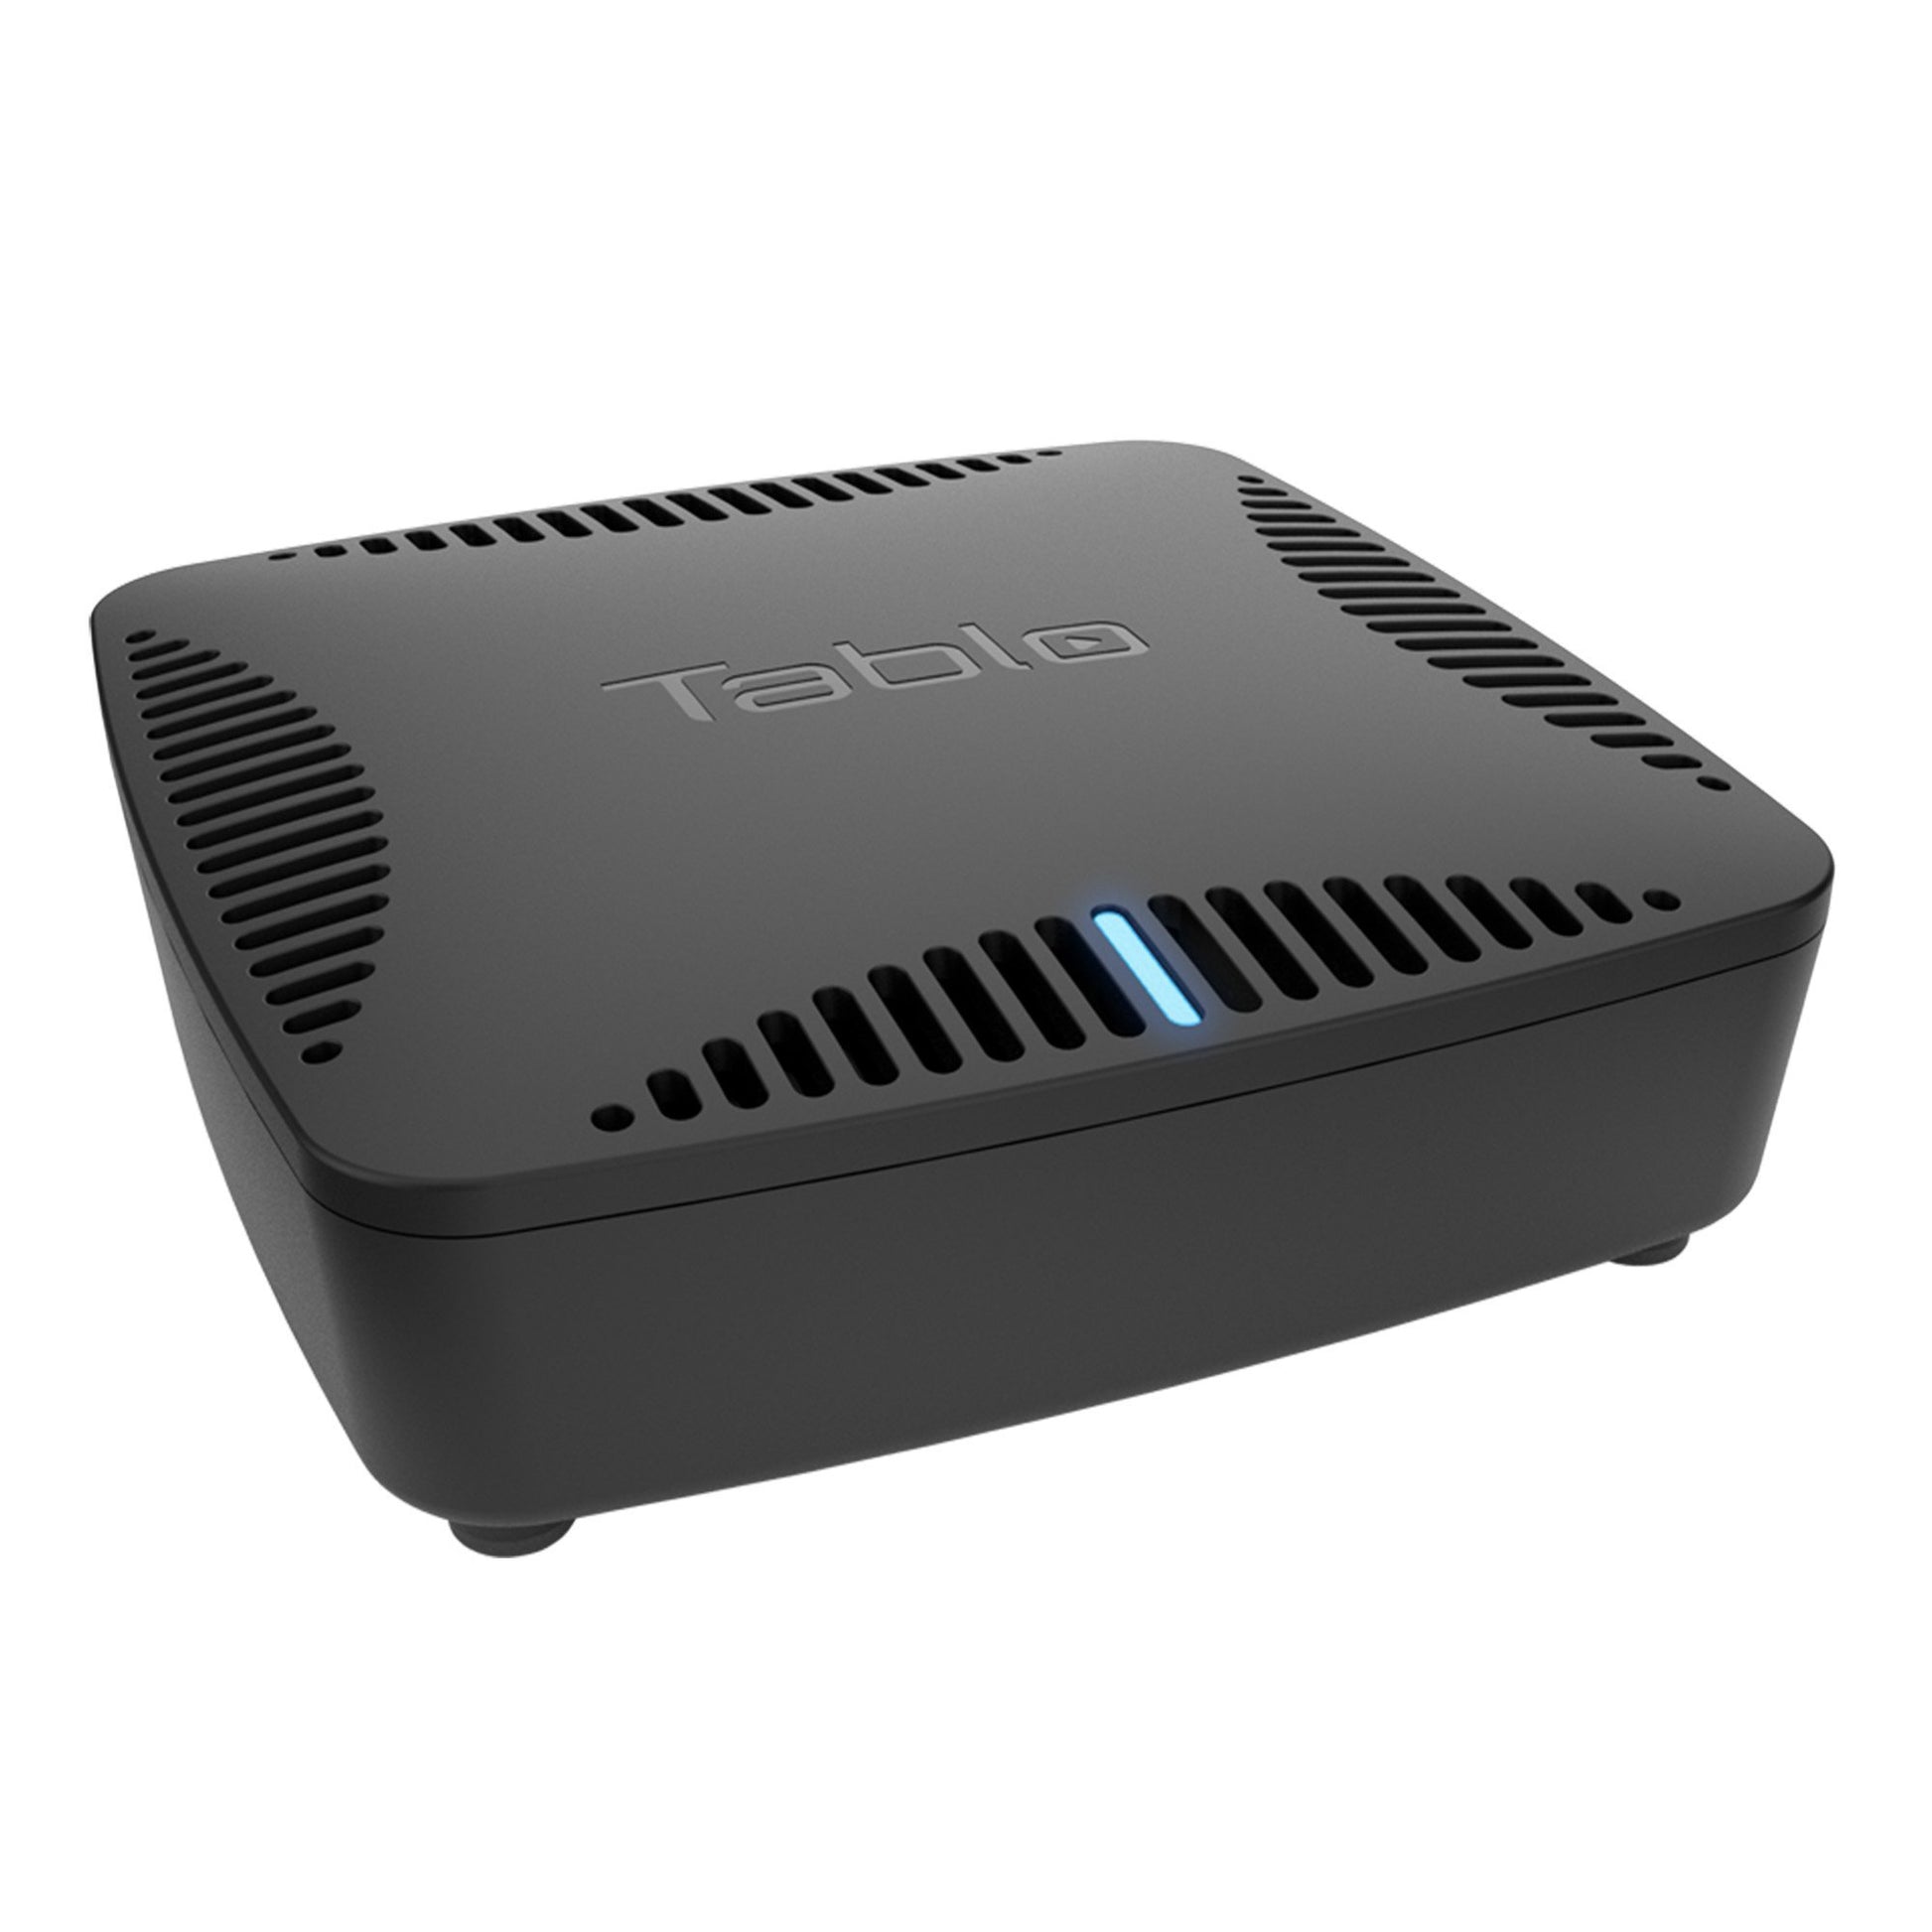 Tablo DUAL LITE Over-The-Air (OTA) DVR (Digital Video Recorder) for Cord Cutters. DVR hardware front. side view.